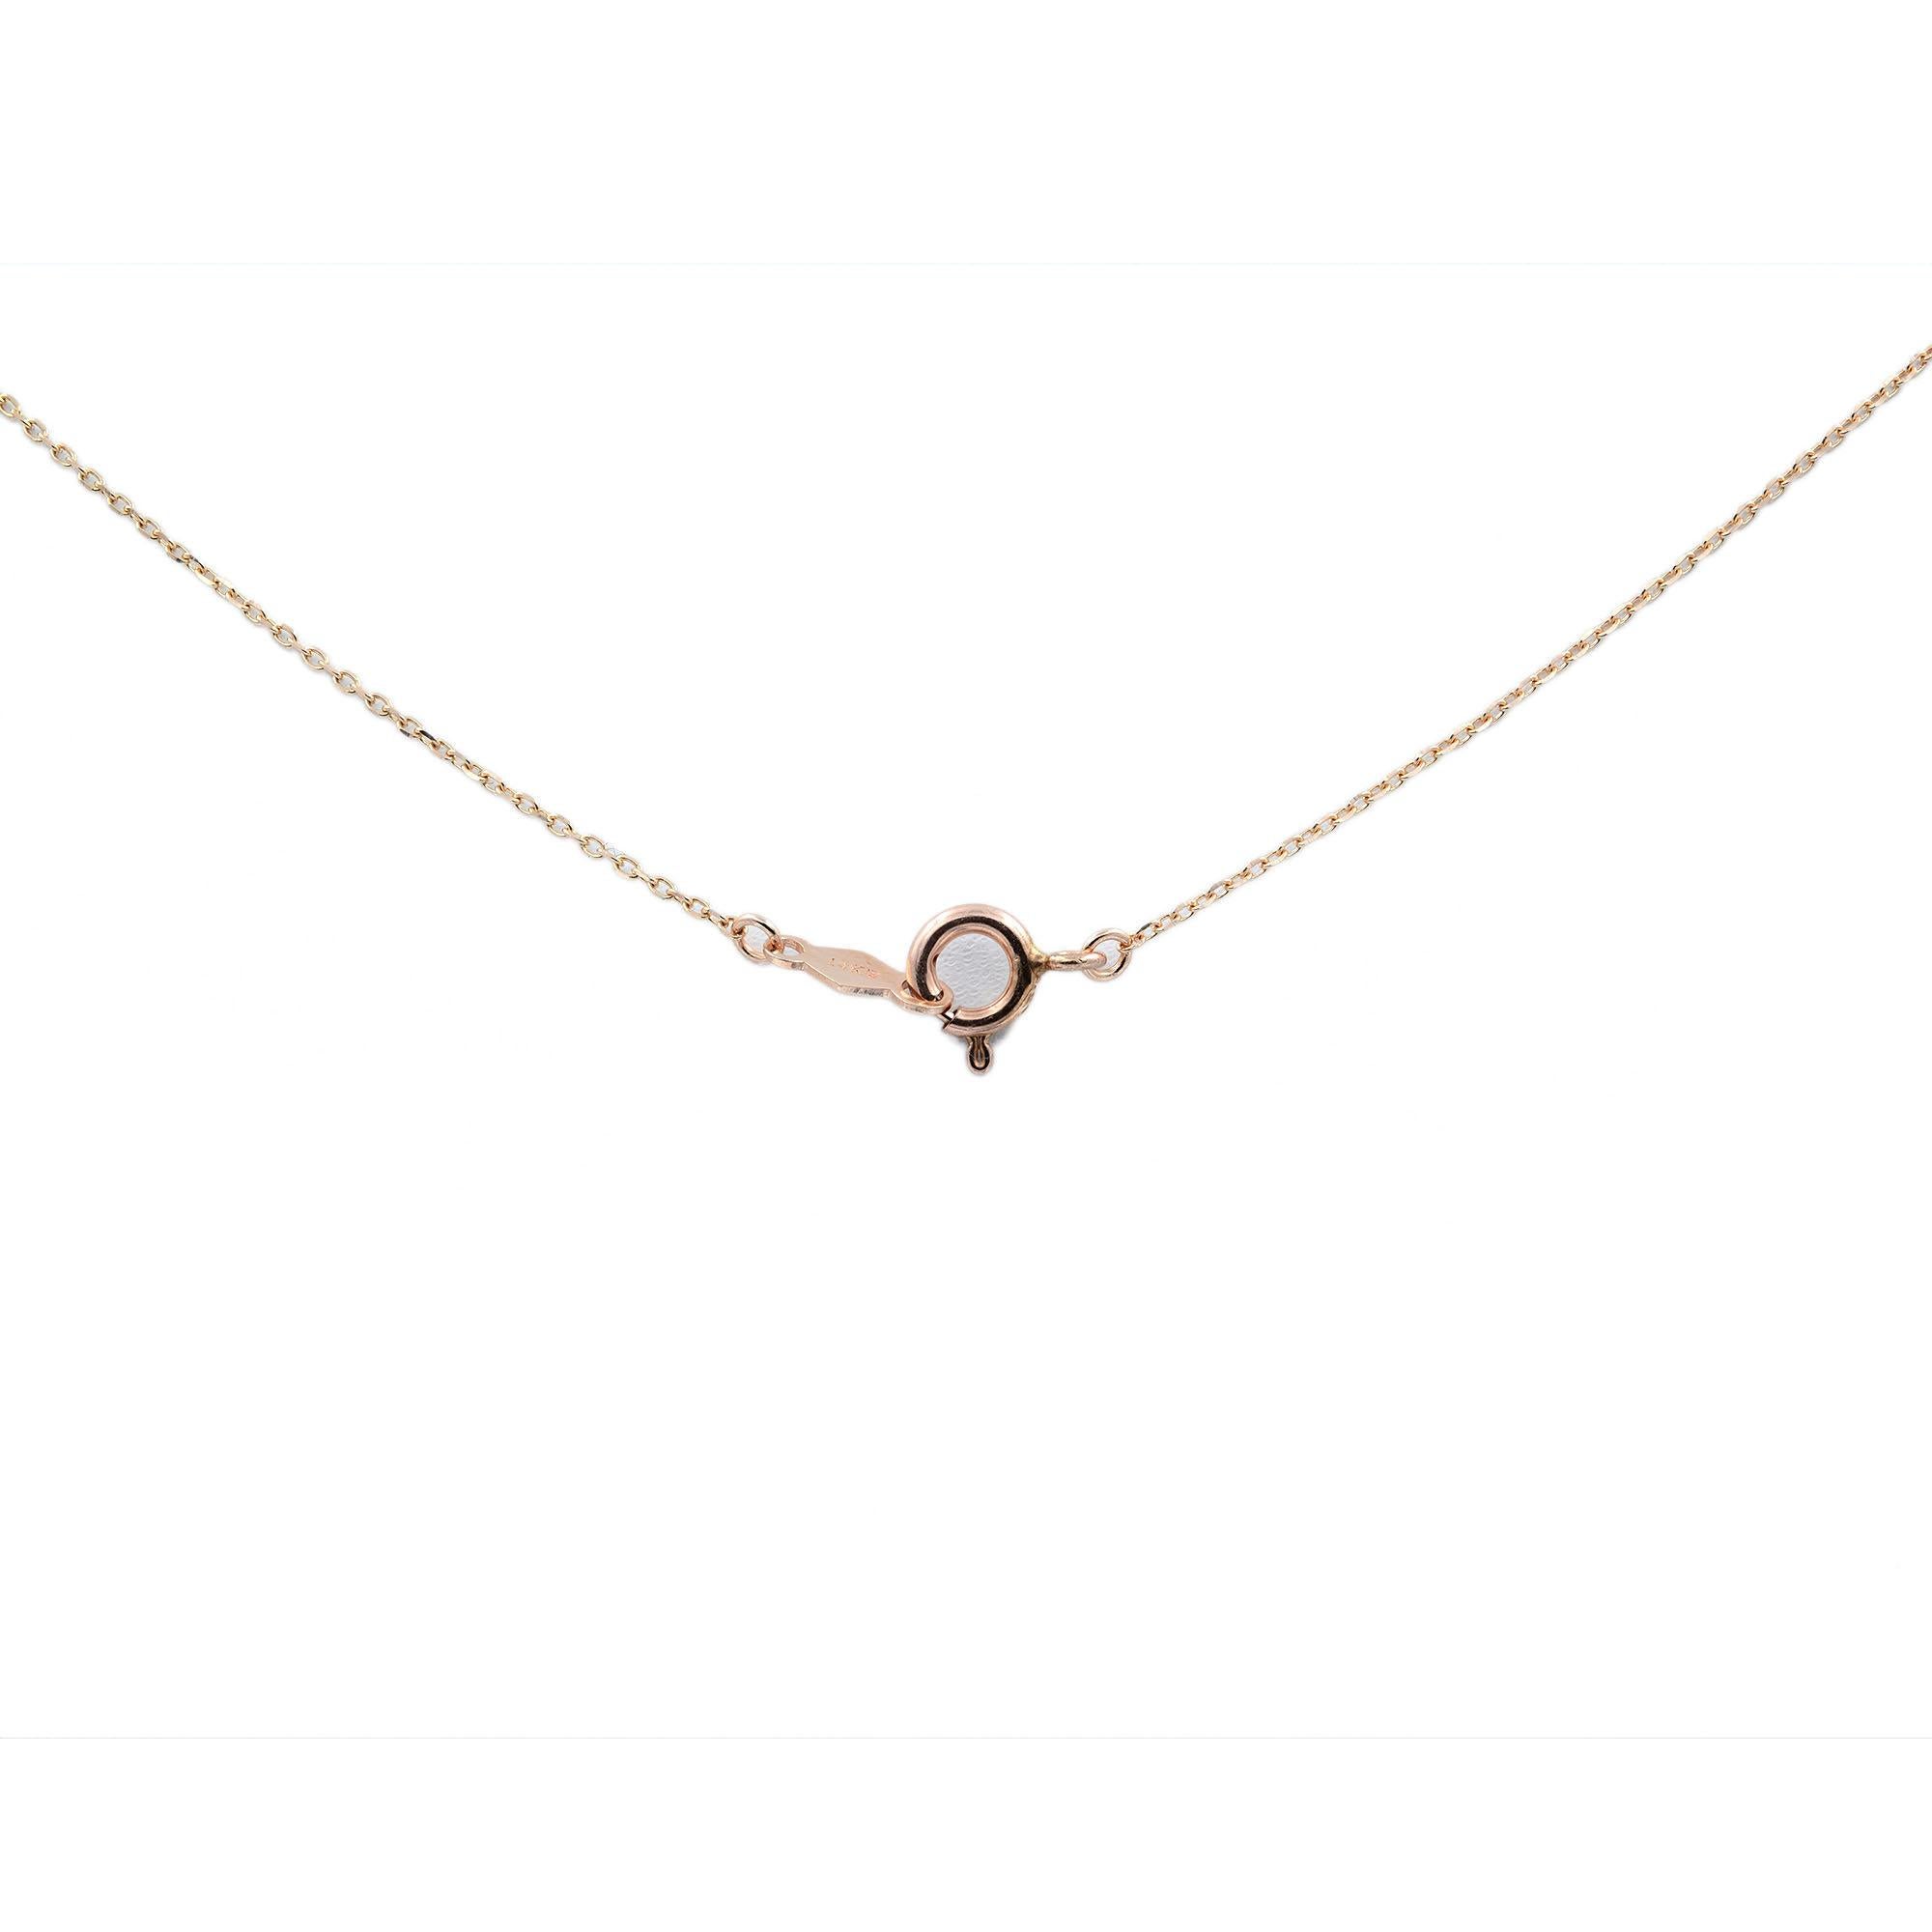 This beautiful dainty small 'A' initial letter pendant chain necklace can be worn alone or stacked with other necklaces. Crafted in fine 14k rose gold. Necklace length: 16 inches. Size of the Letter: 5mm. Total weight: 1.1 gms. Comes with a